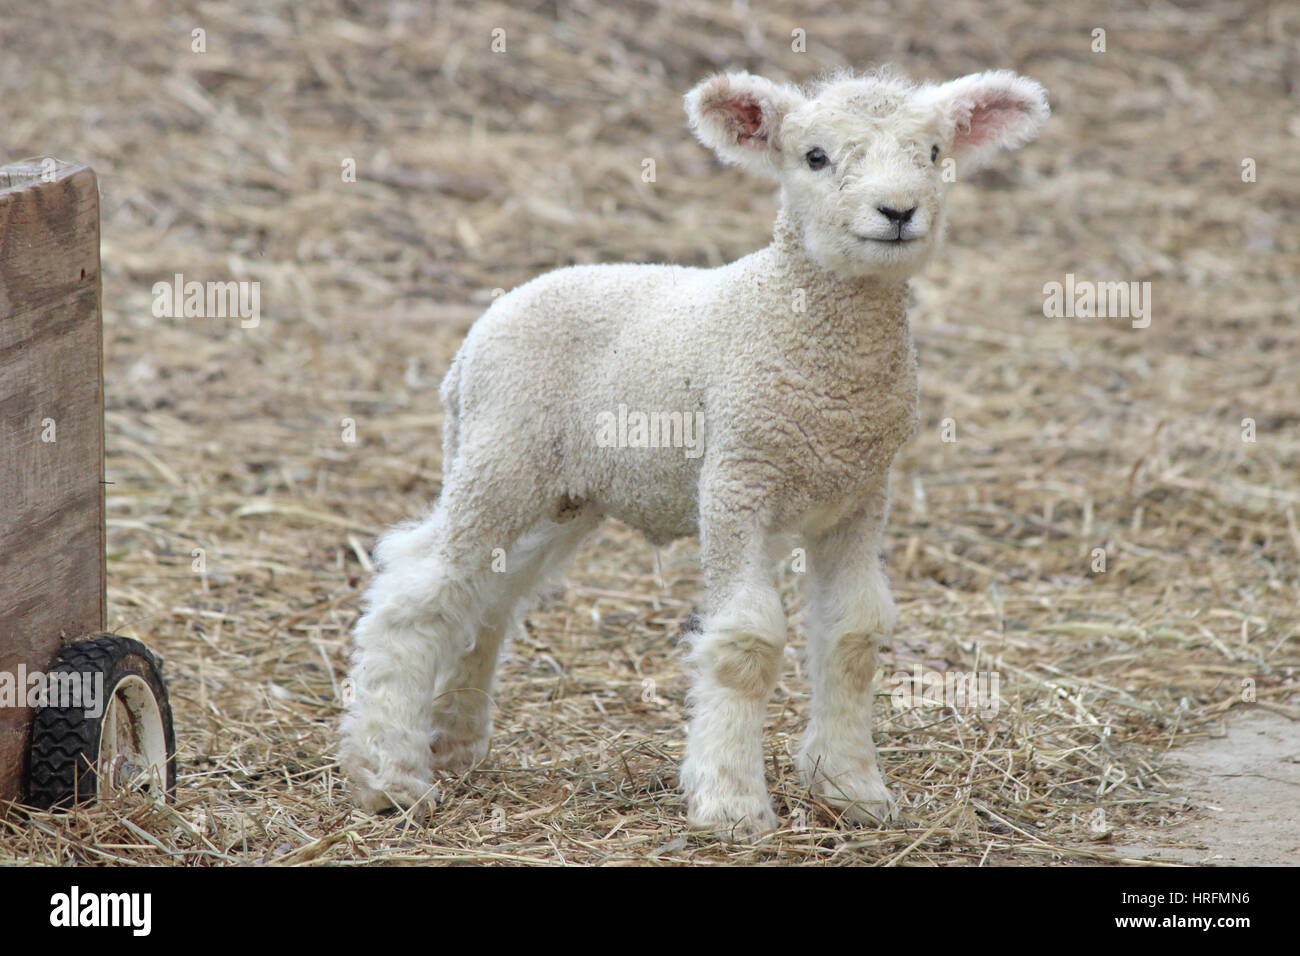 A white woolly newborn lamb standing in a pasture on a farm Stock Photo